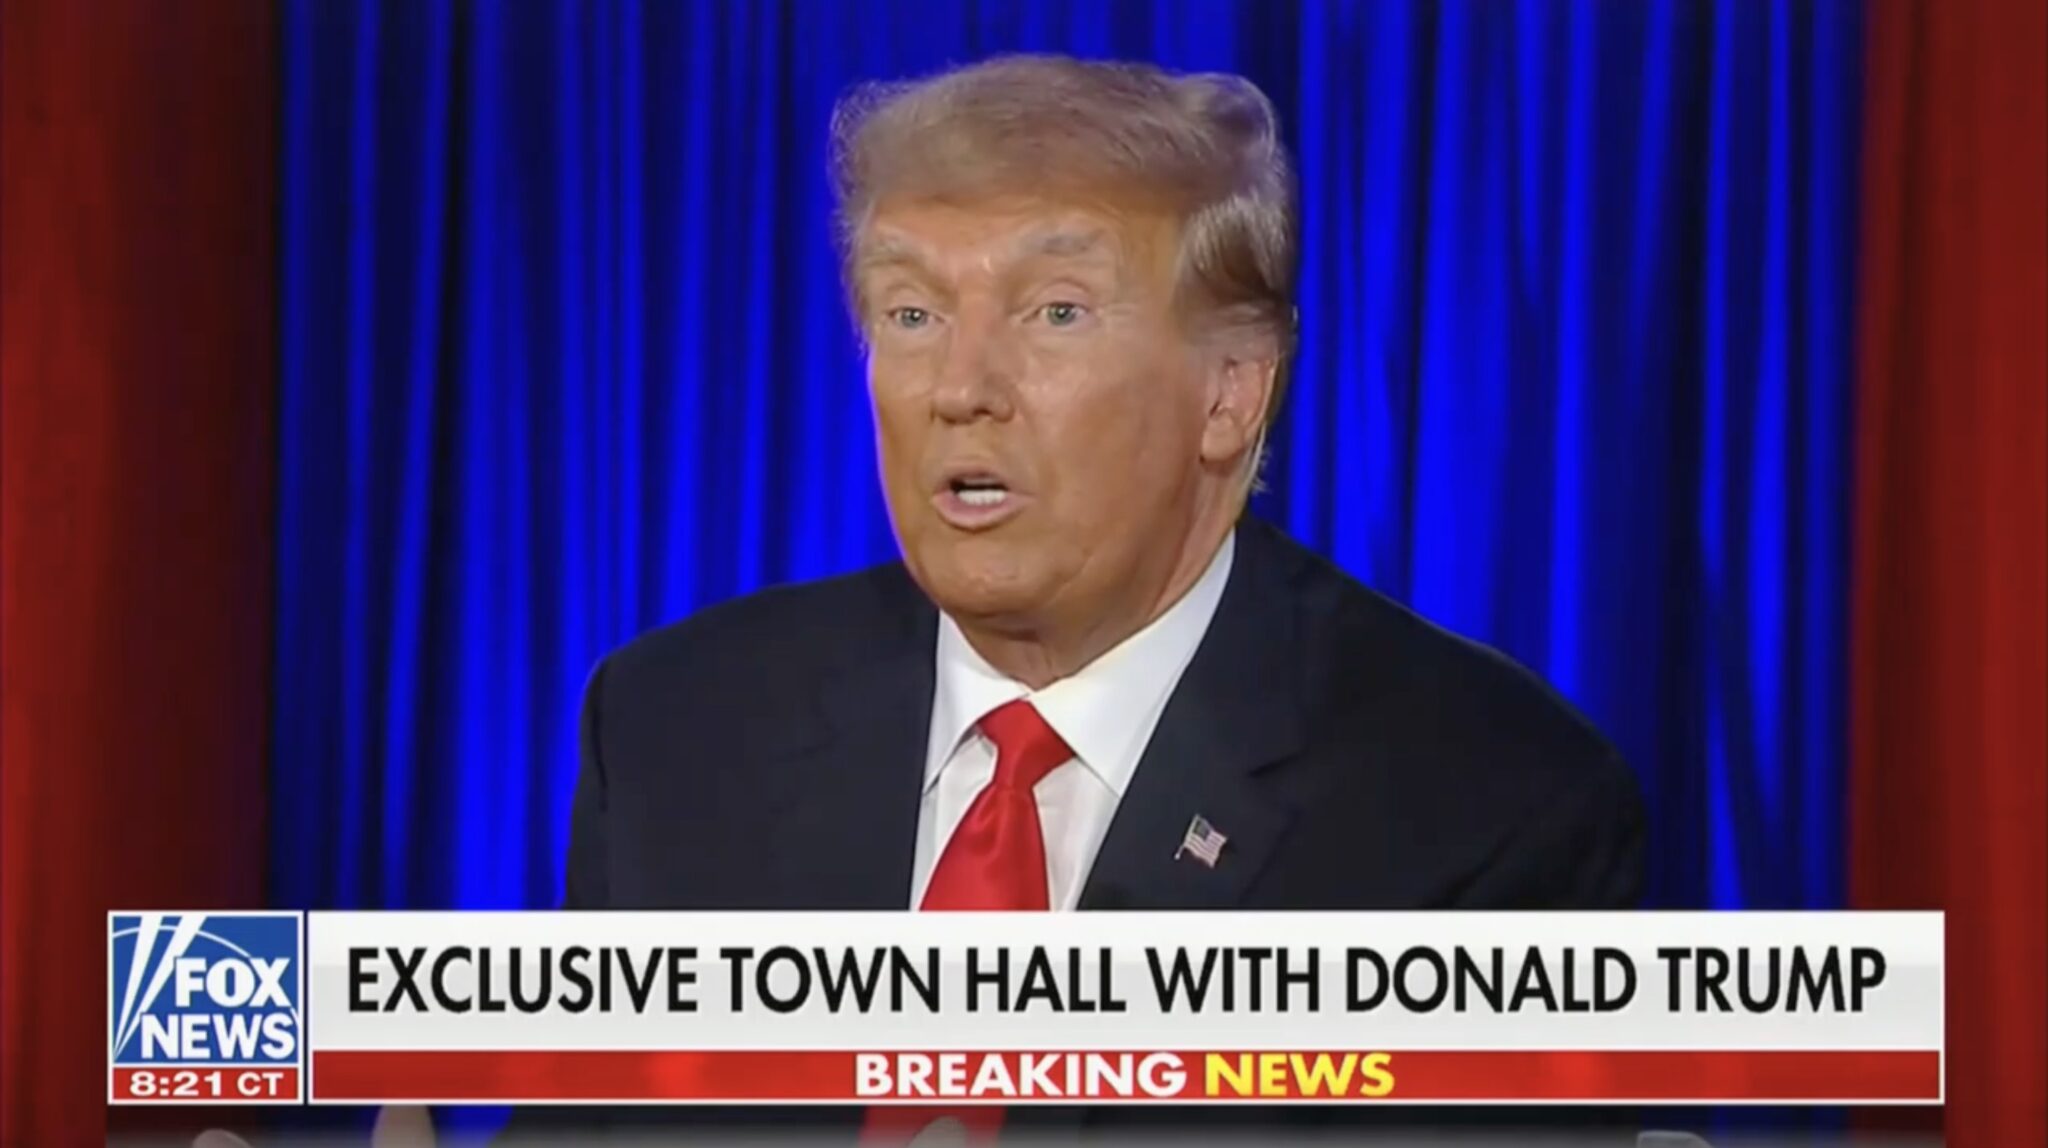 EVEN FOX NEWS VIEWERS ARE TIRED OF TRUMP — townhall a total disaster 🤡